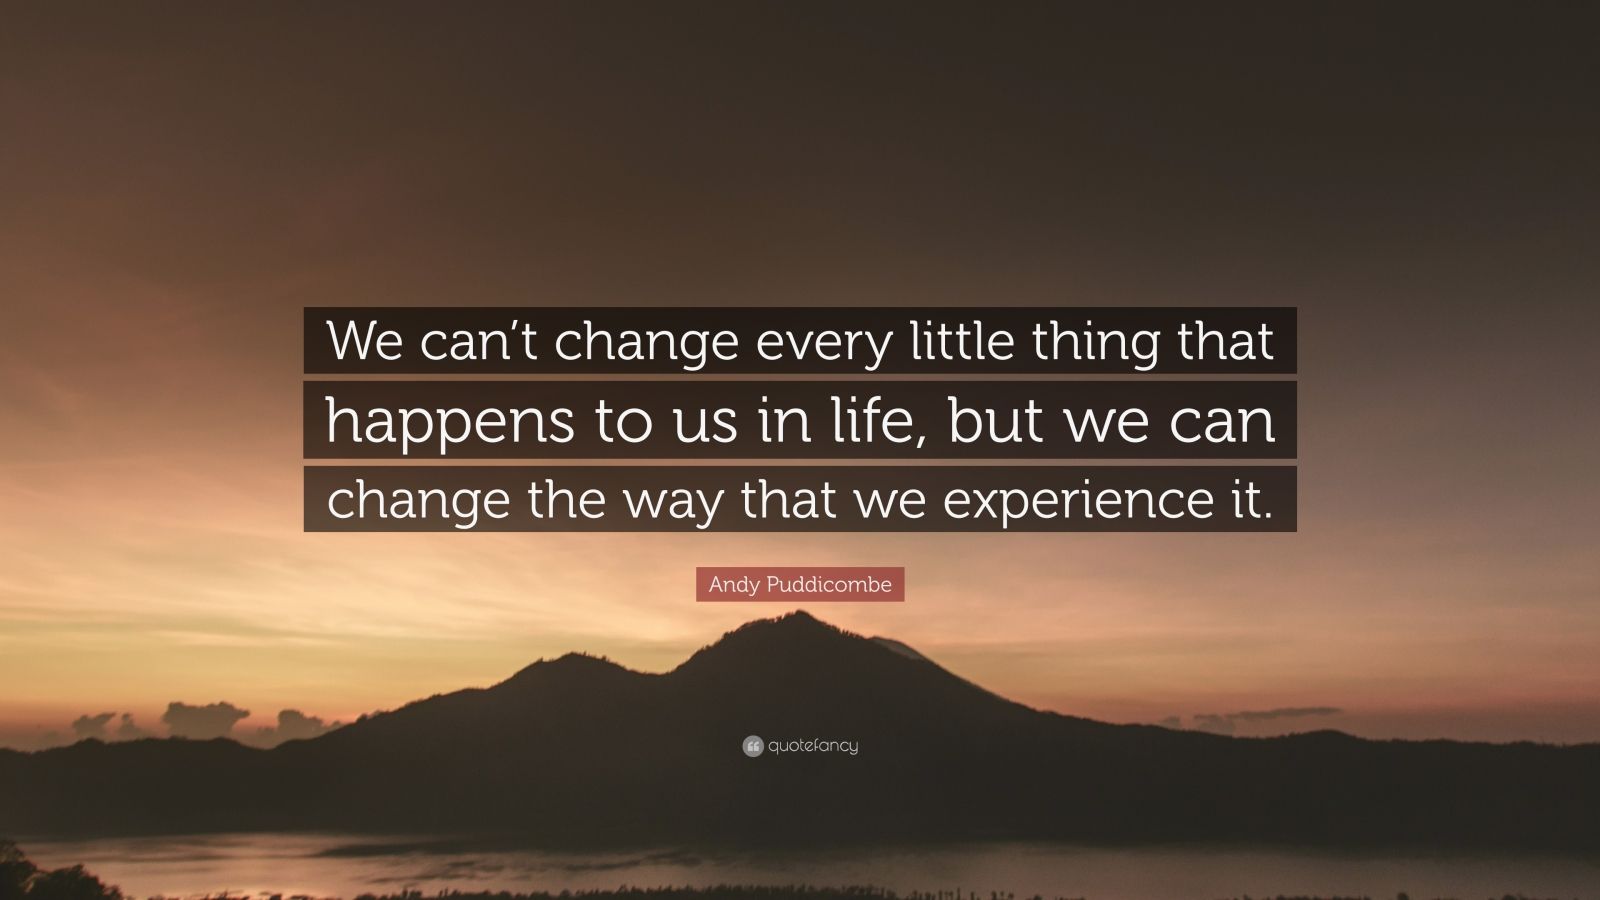 Andy Puddicombe Quote: “We can’t change every little thing that happens ...